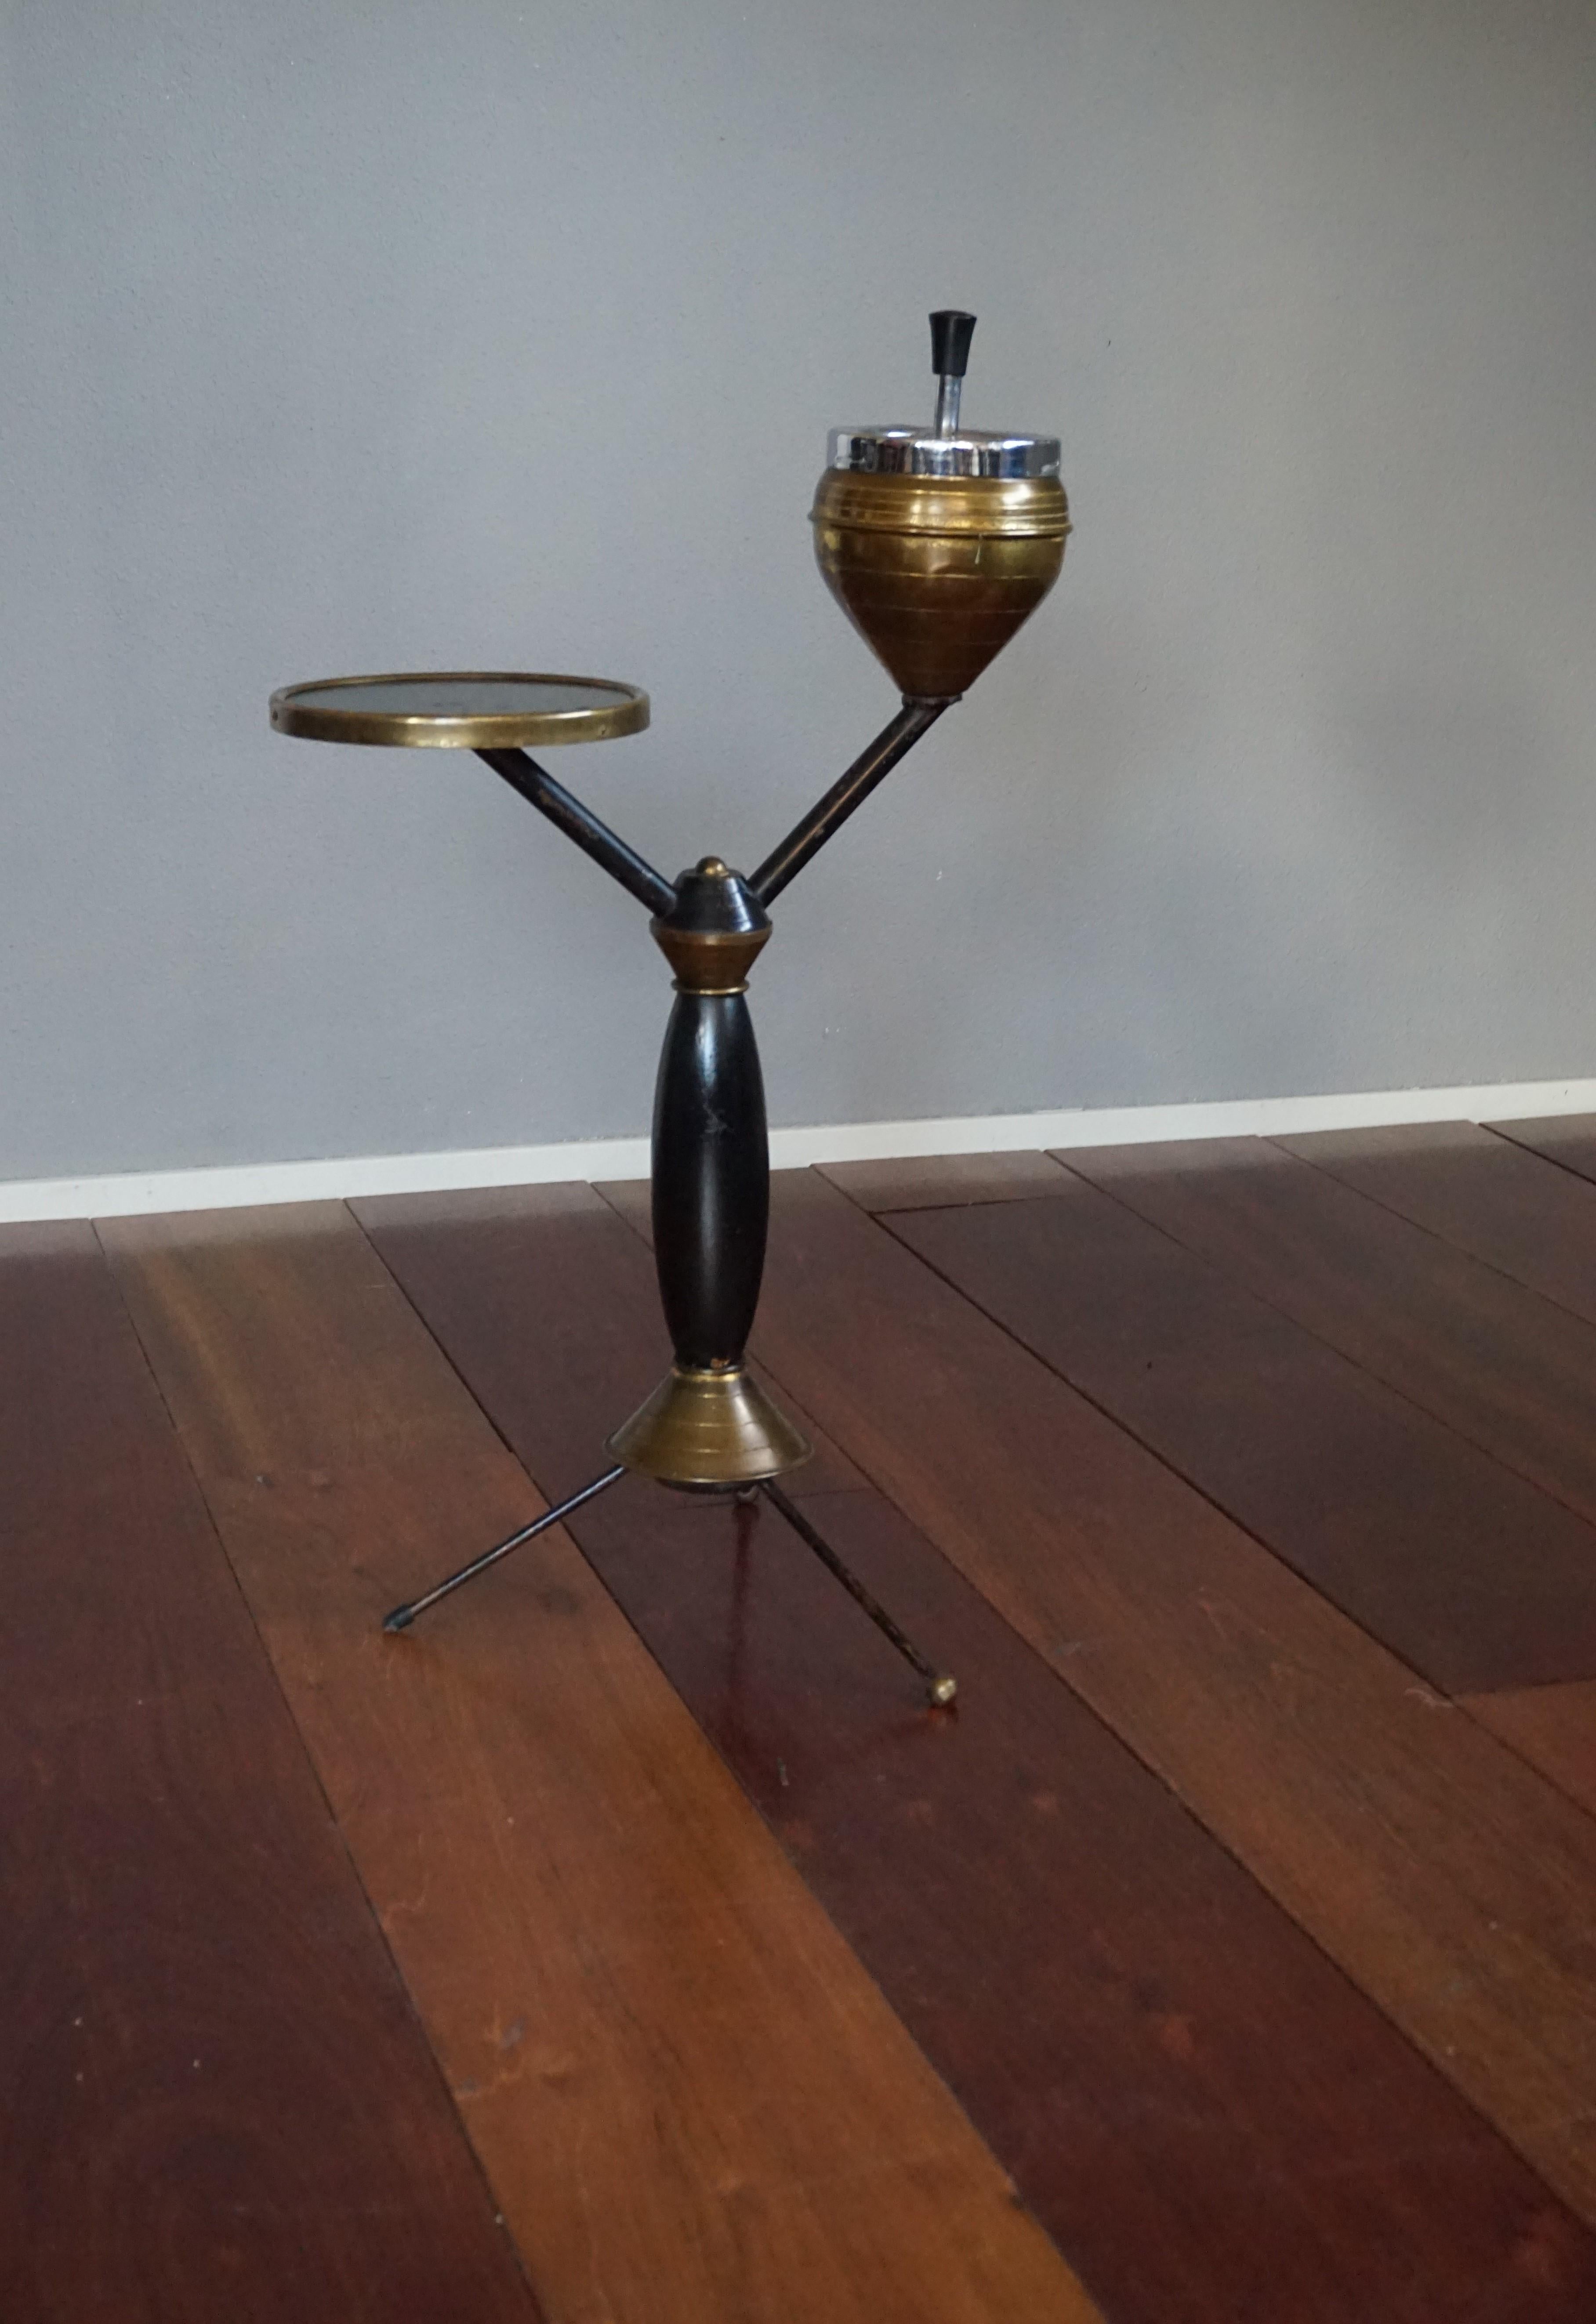 Rare and coolest design smoking stand.

Yes, one of the brass balls on the tripod base has been replaced by a black rubber 'stud' and yes there is some wear, but where on earth are you ever going to find another one of these beautifully designed,